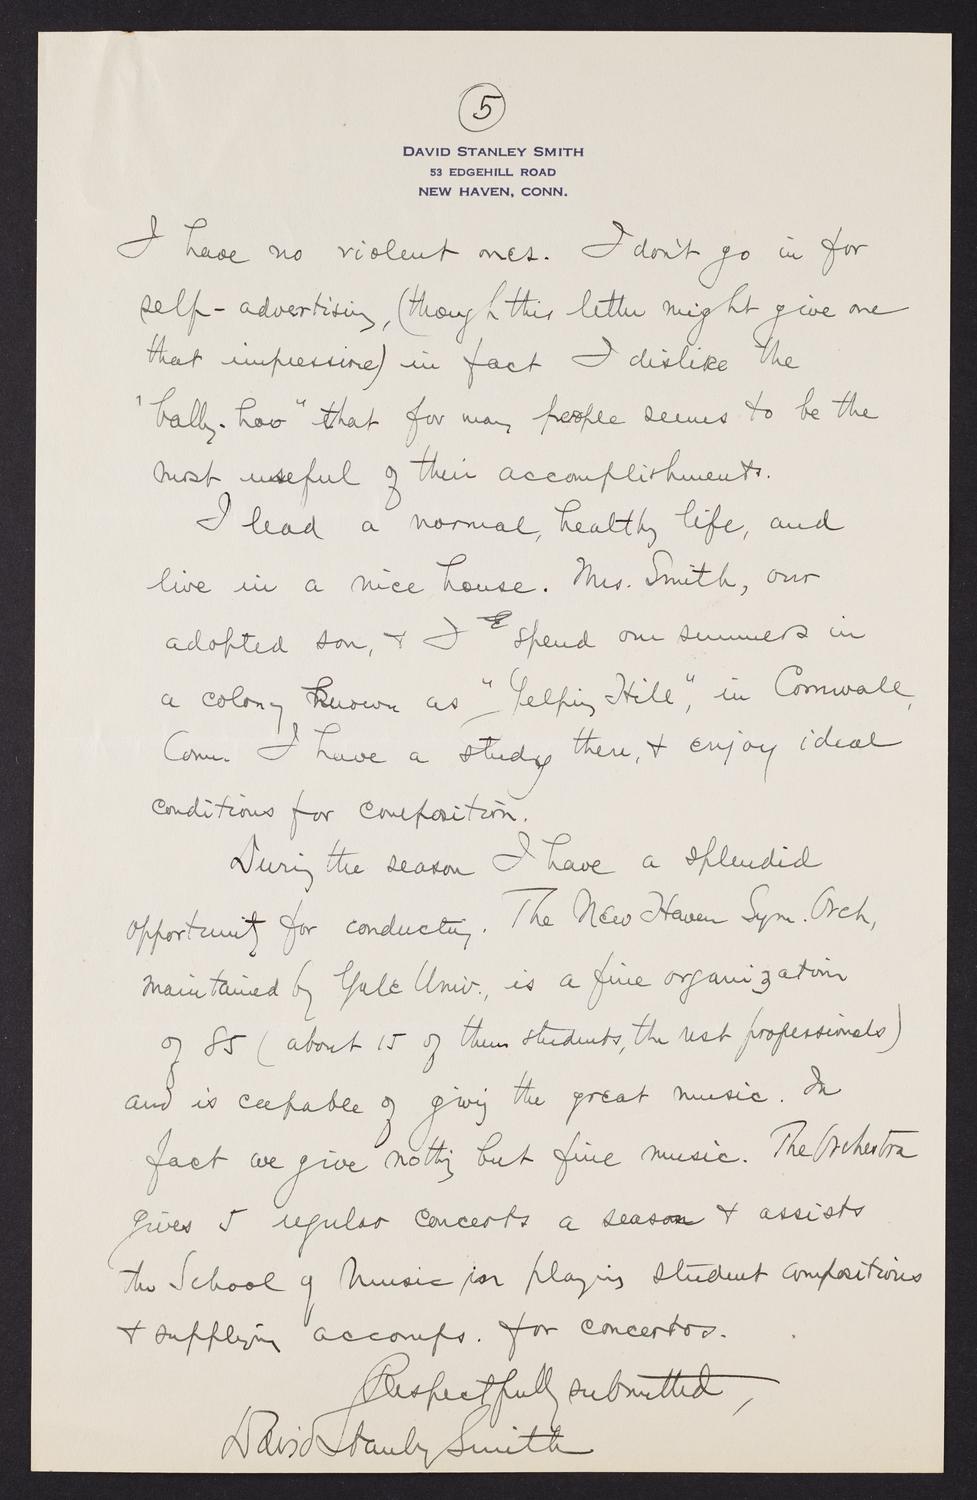 Correspondence from David Stanley Smith to David Ewen, page 5 of 5